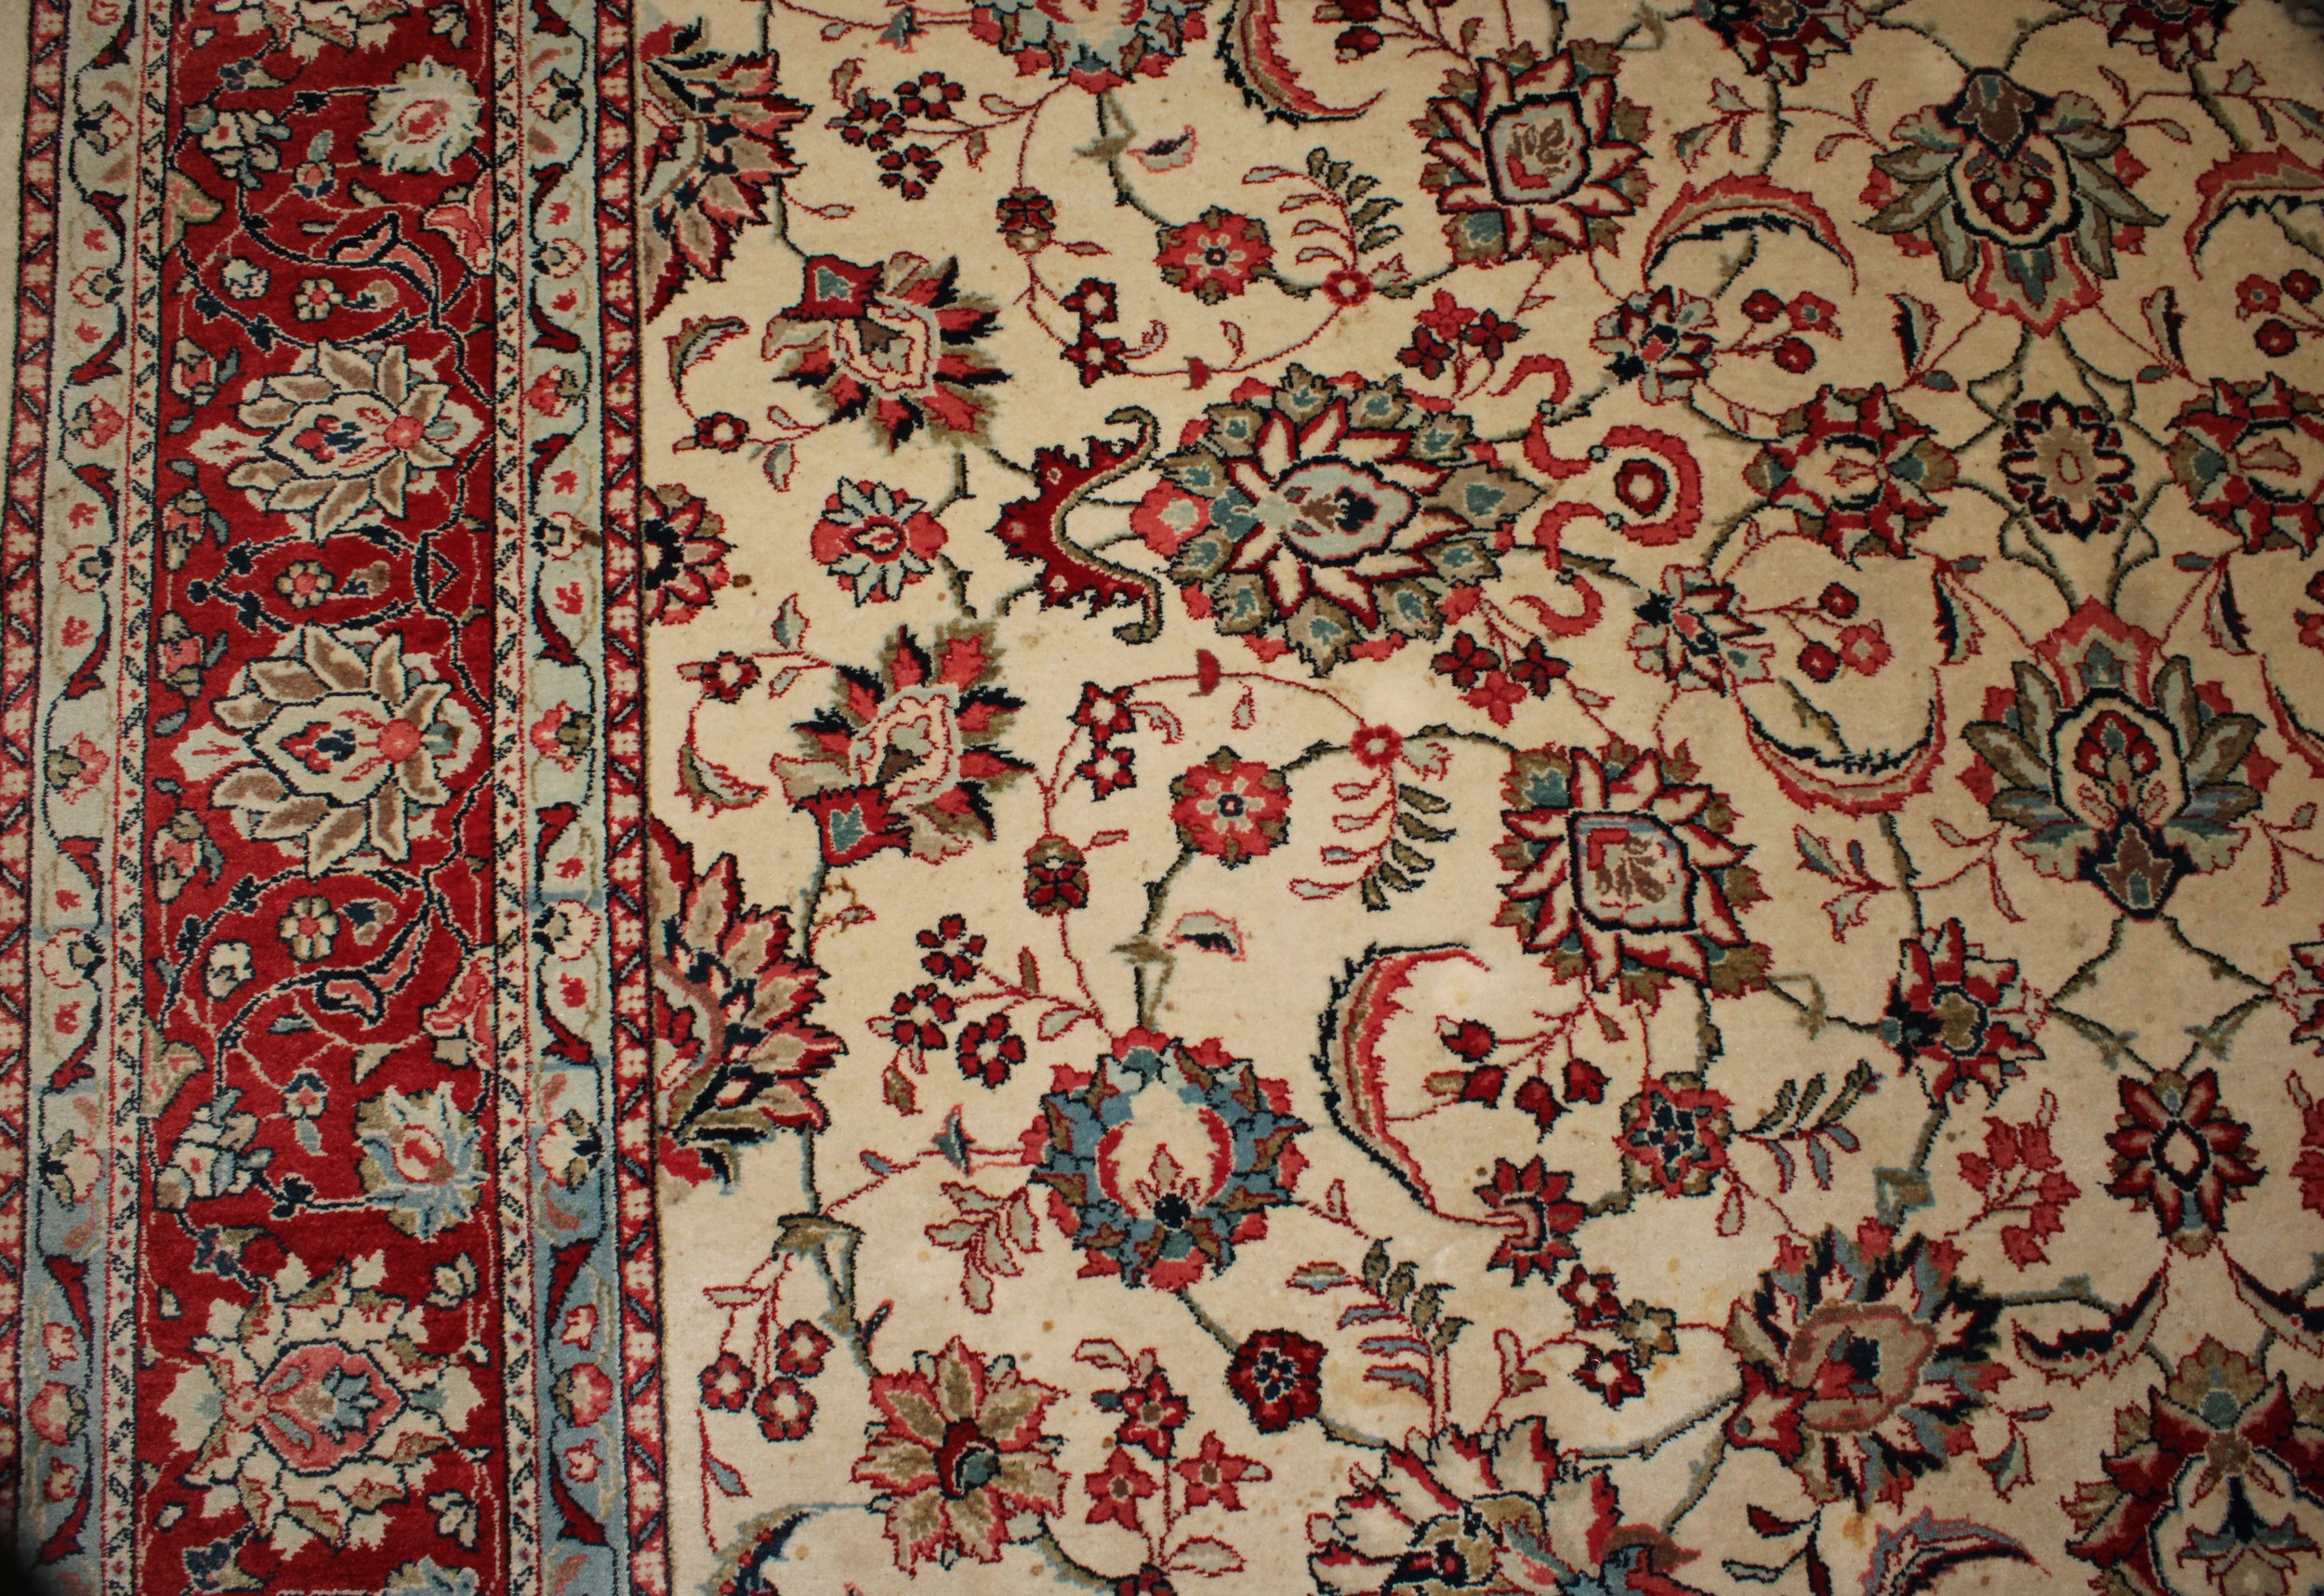 An Iranian Isfahan type wool rug or carpet, 366.5cm x 268cm - Image 3 of 4